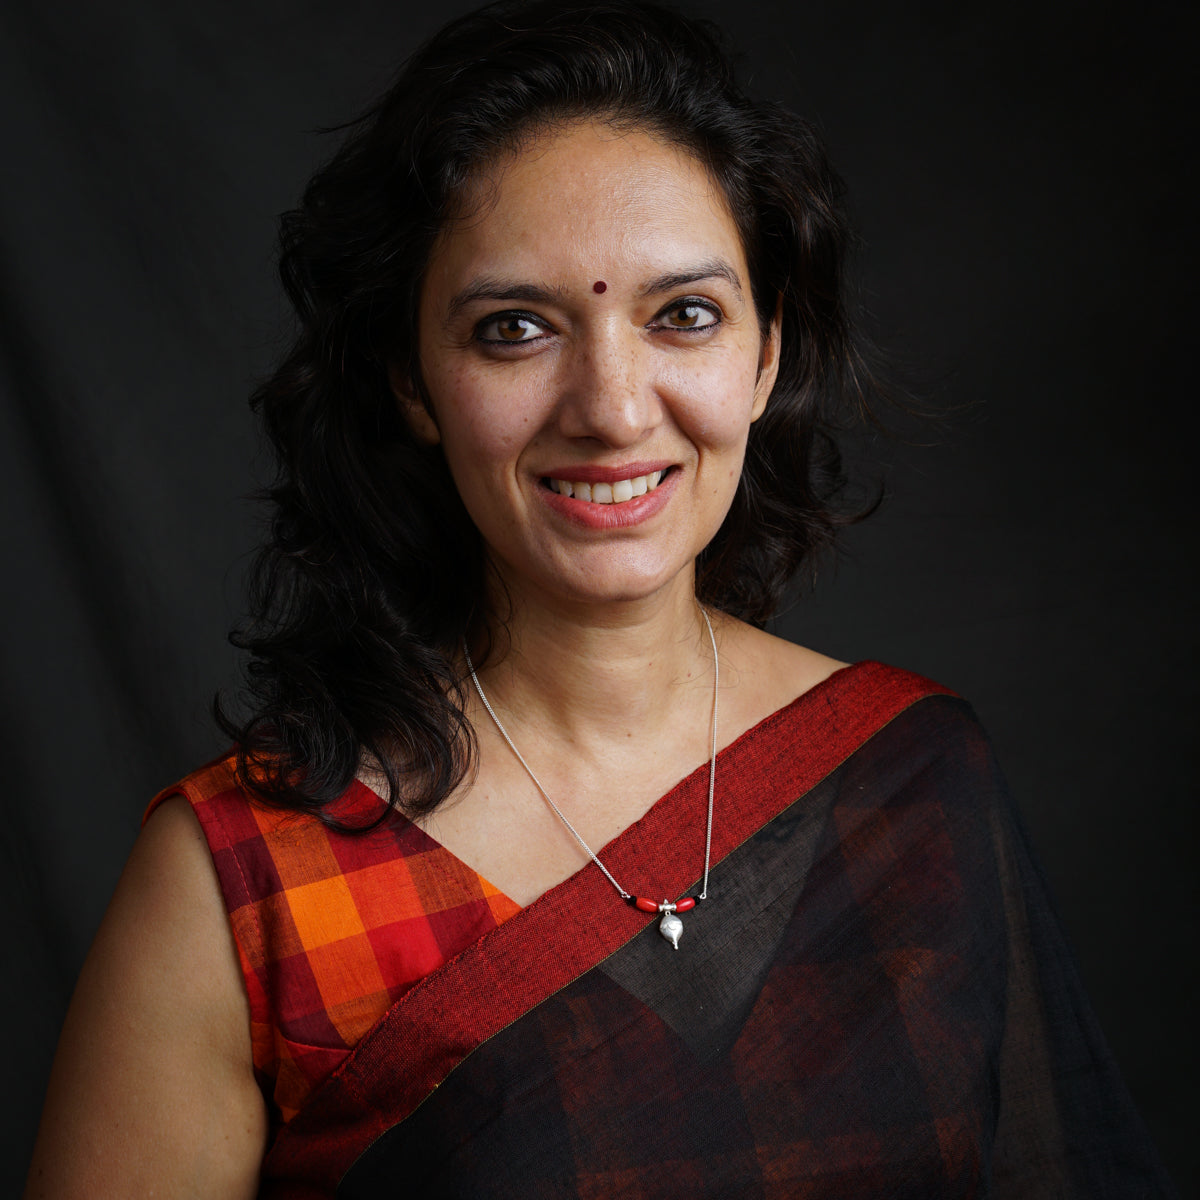 a woman in a red and black sari smiling